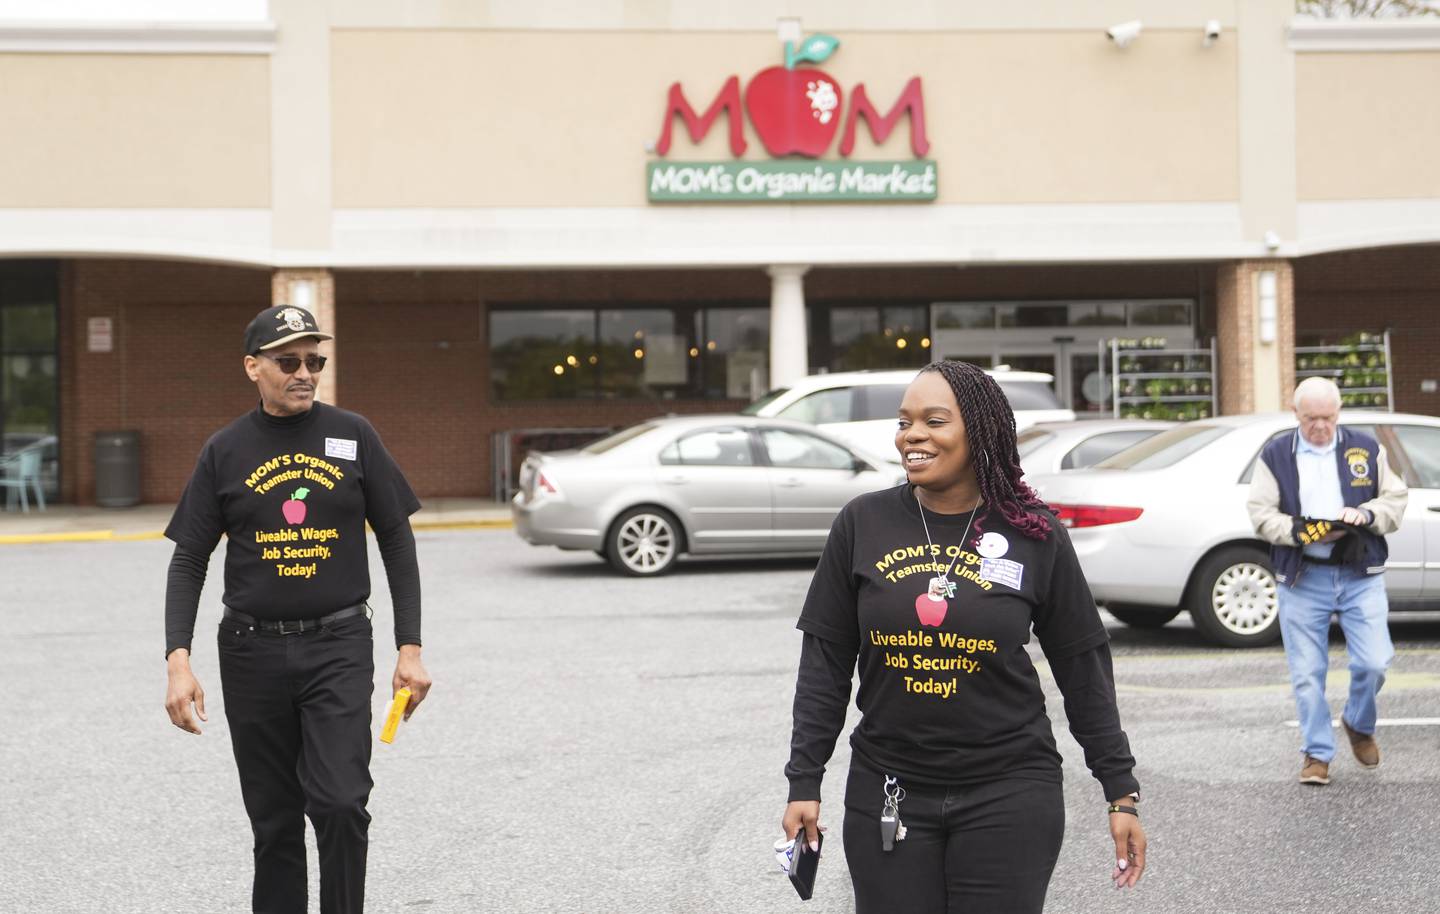 Tia Osborne an organizer for Local 570 and Mo Jackson Vice President of Temasters Local 570 walk outside of MOM’s Organic Market in Timonium, Saturday, April 29, 2023.